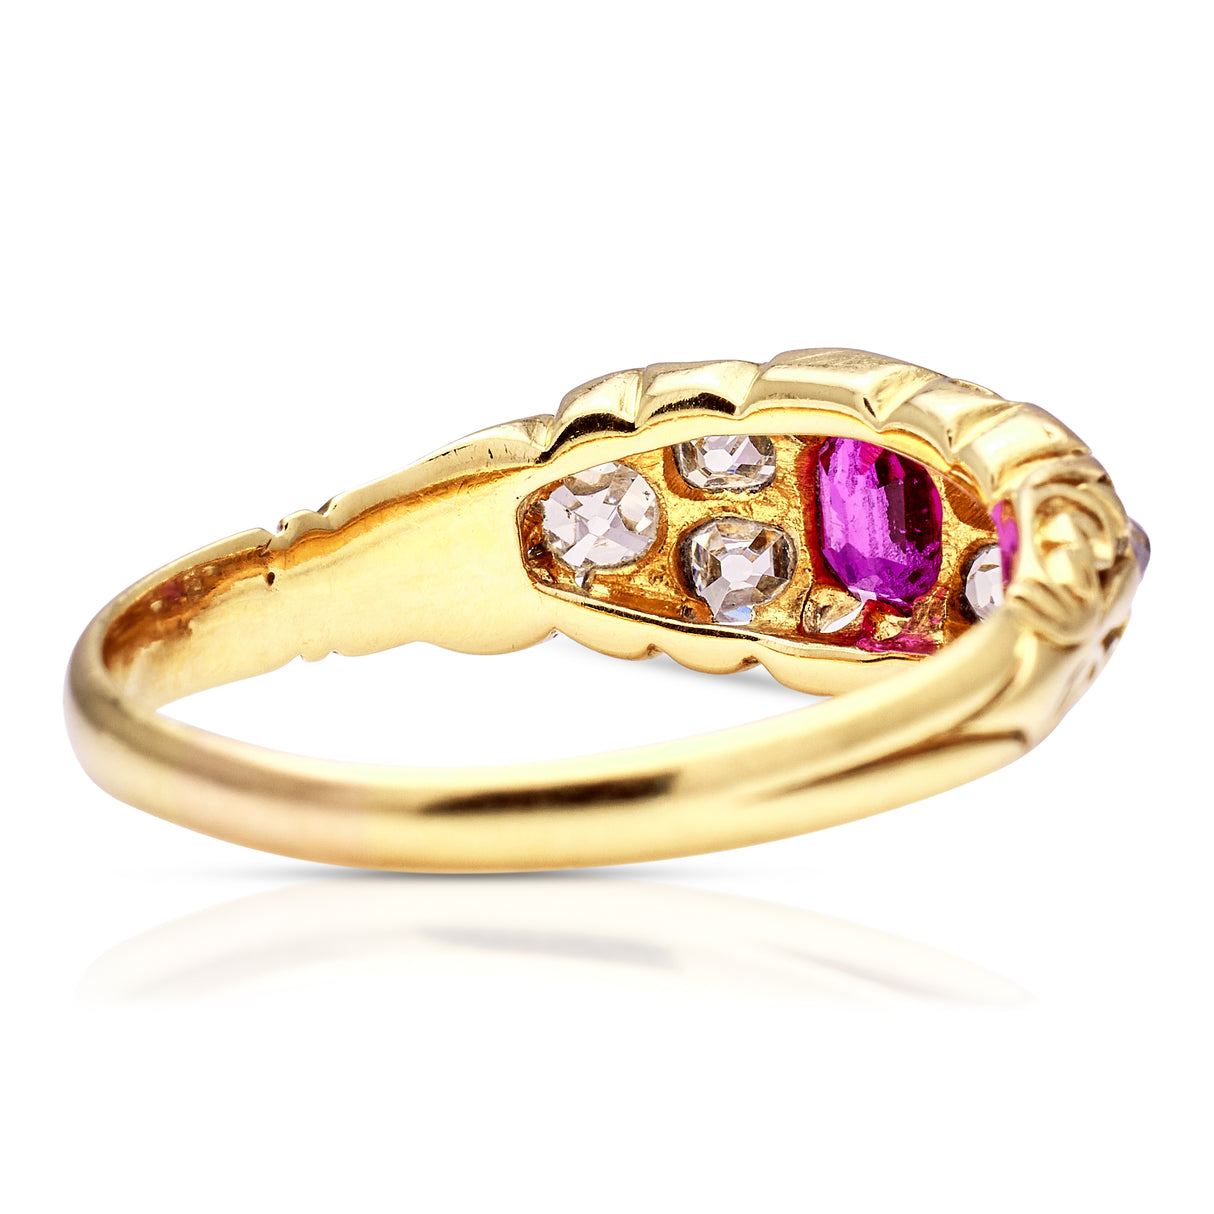 Antique, Victorian Burmese Ruby and Diamond Engagement Ring, 18ct Yellow Gold rear view